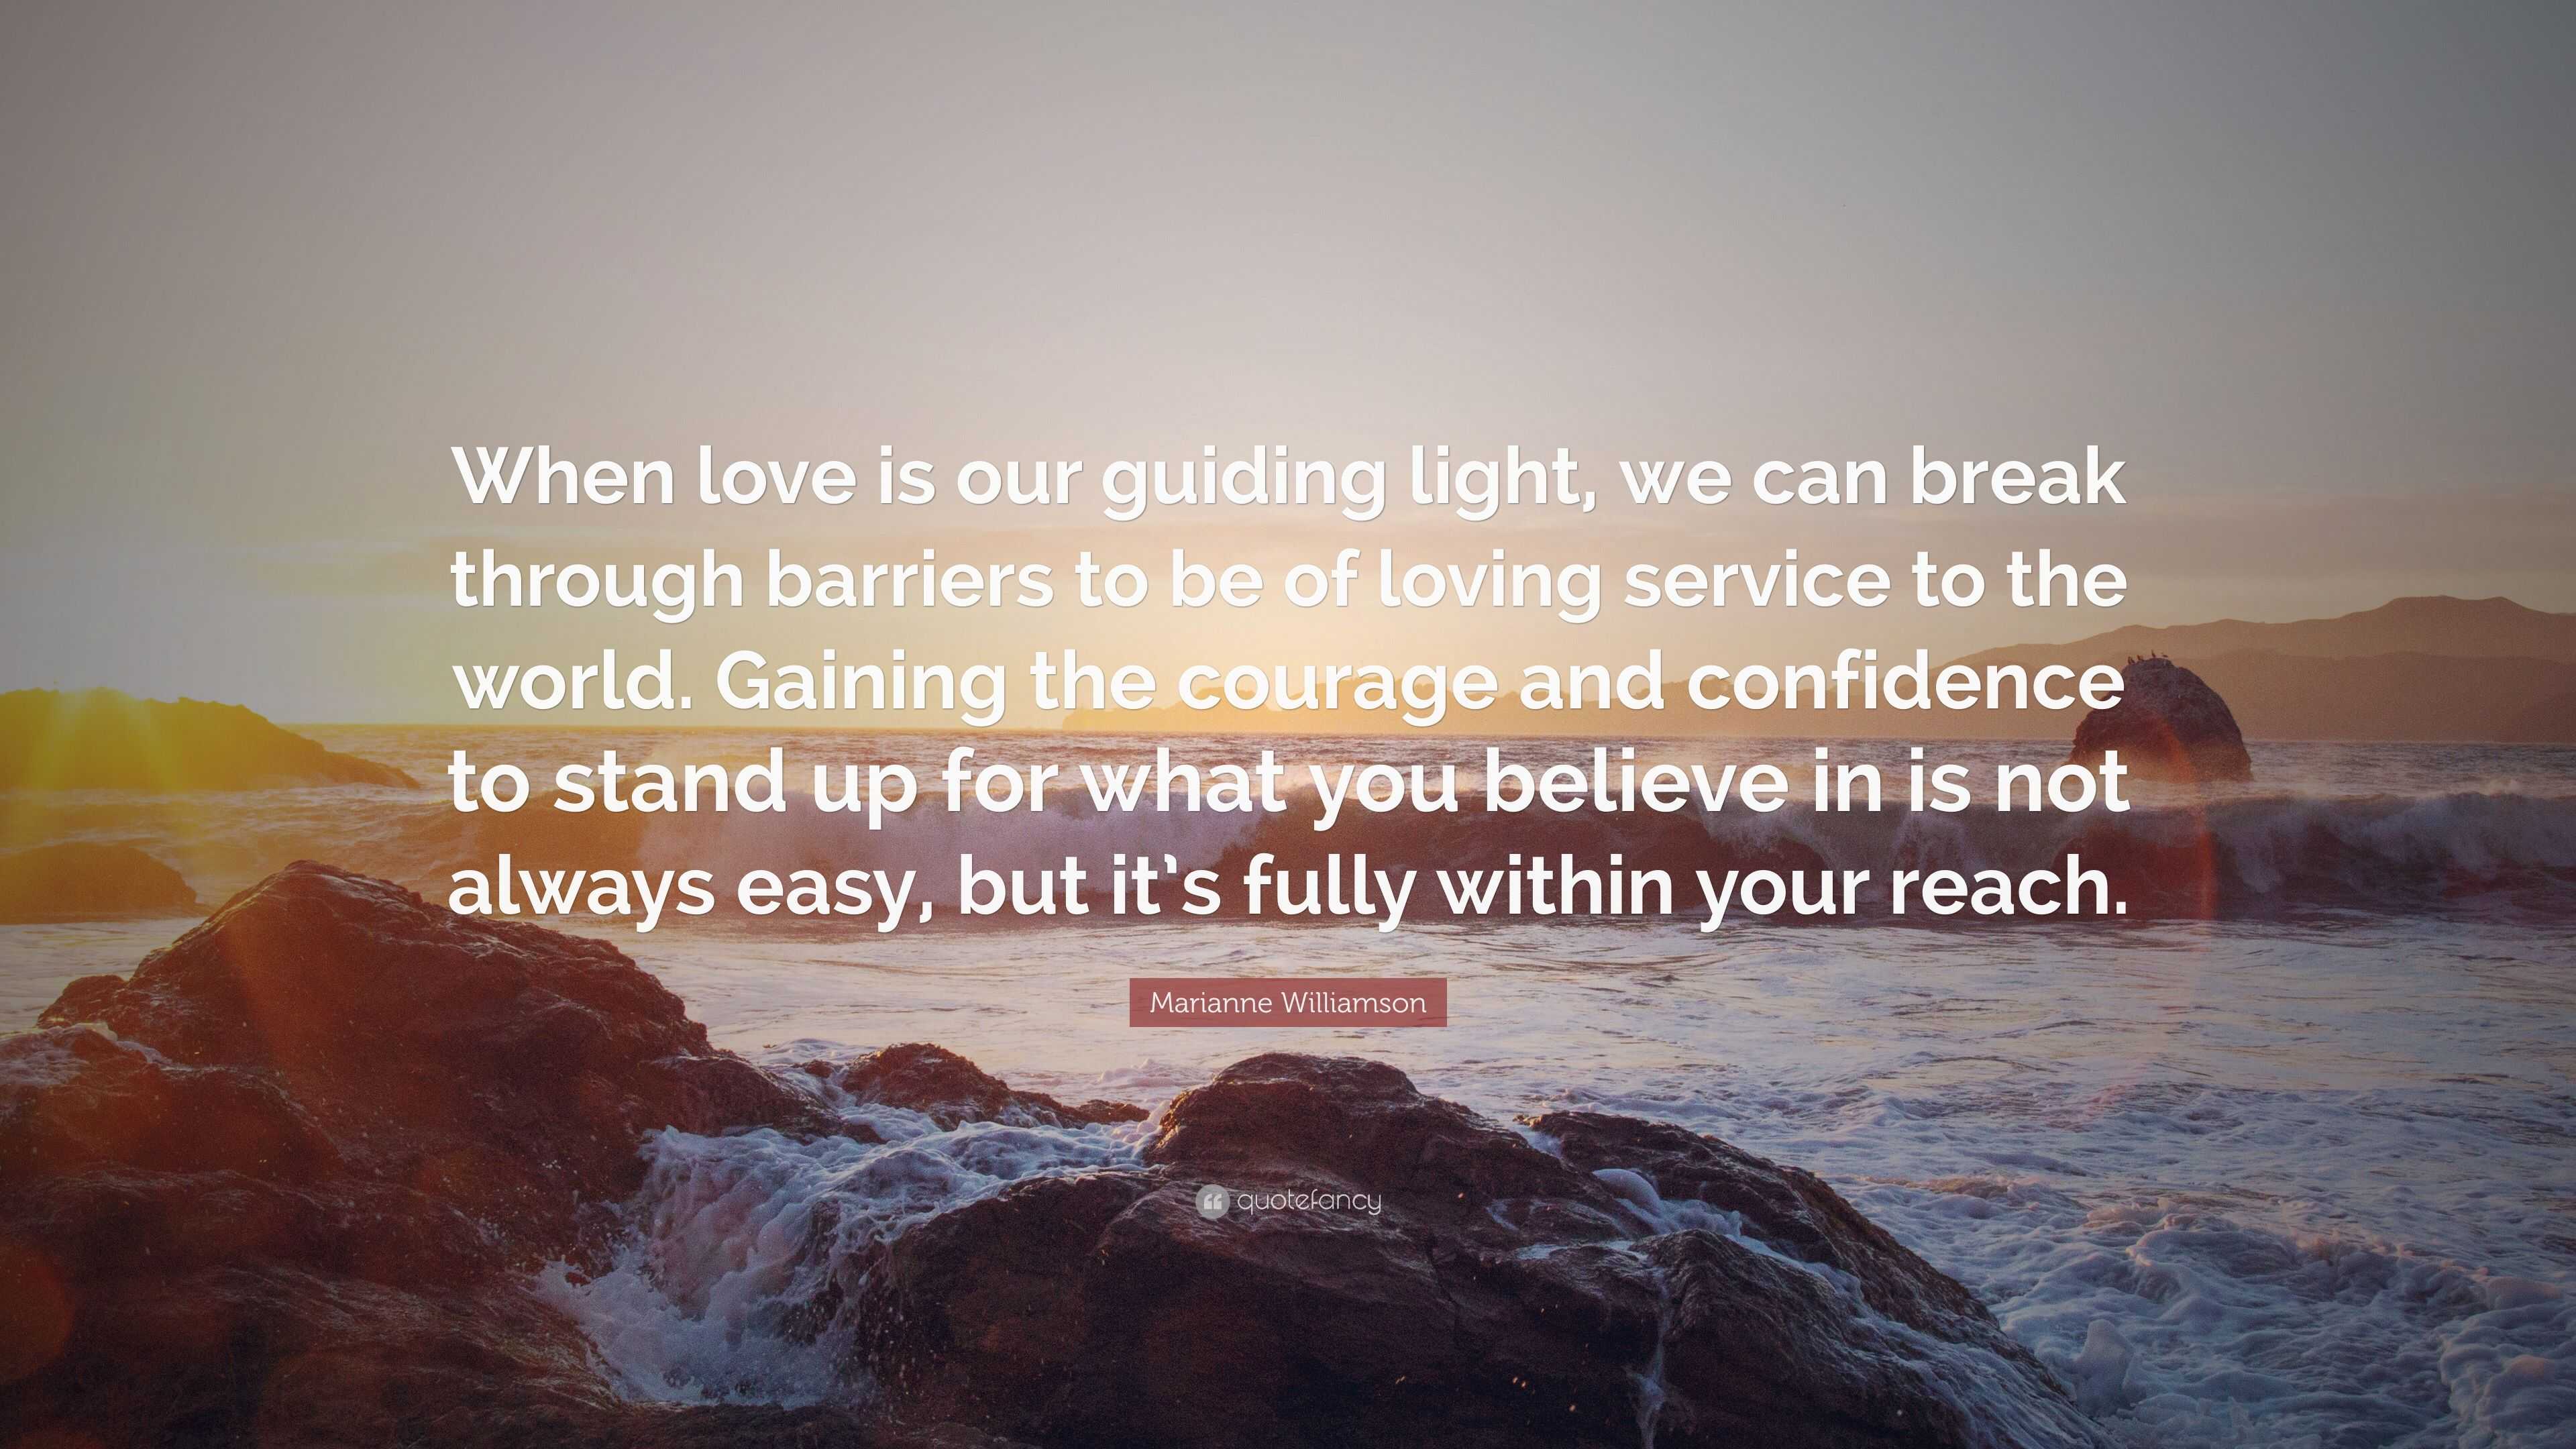 Marianne Williamson Quote “when Love Is Our Guiding Light We Can Break Through Barriers To Be